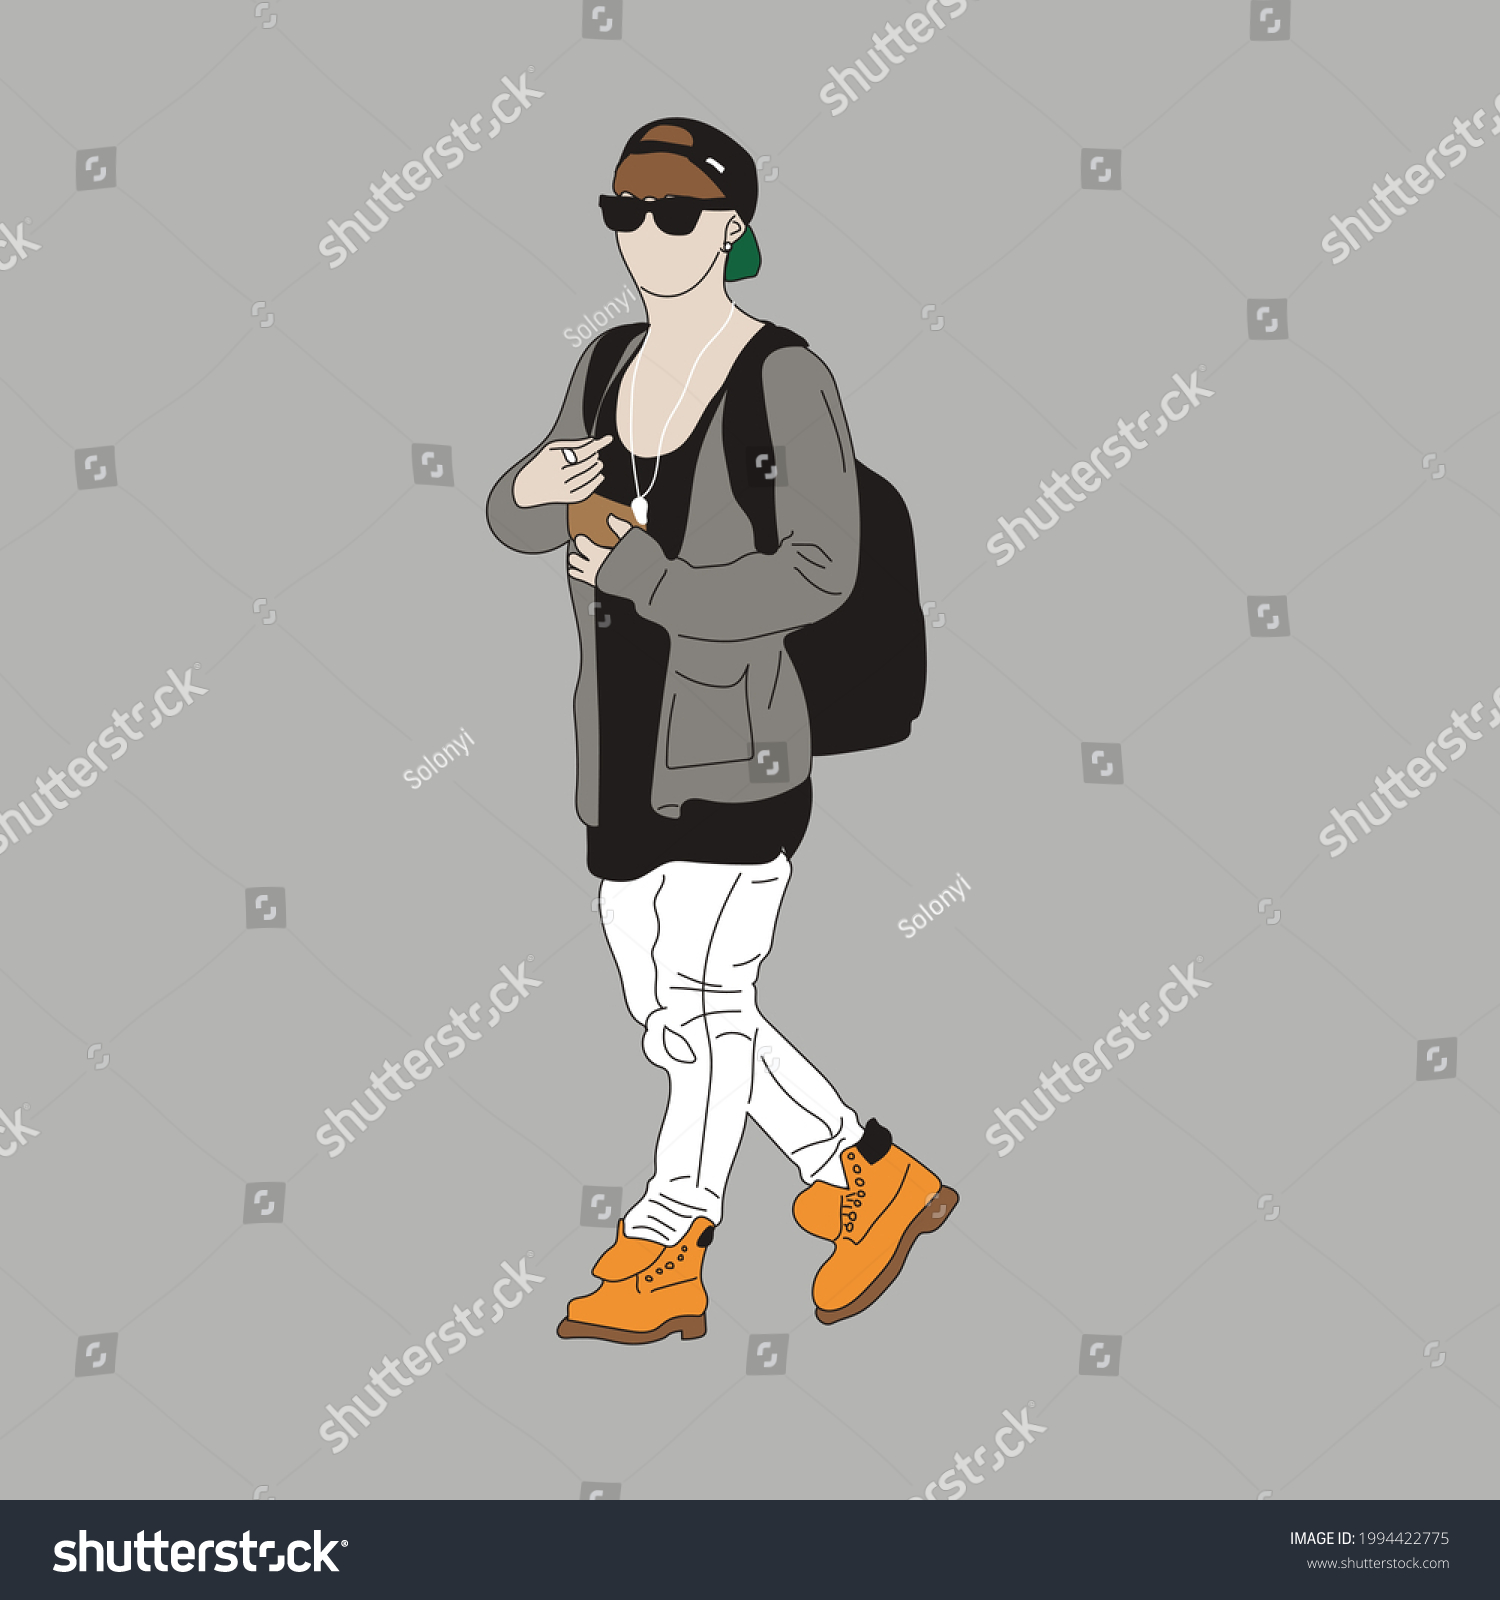 SVG of Vector illustration of Kpop street fashion. Street idols of Koreans. Kpop men's fashion idol.A guy in white jeans and a gray cardigan with boots and backpacks. svg